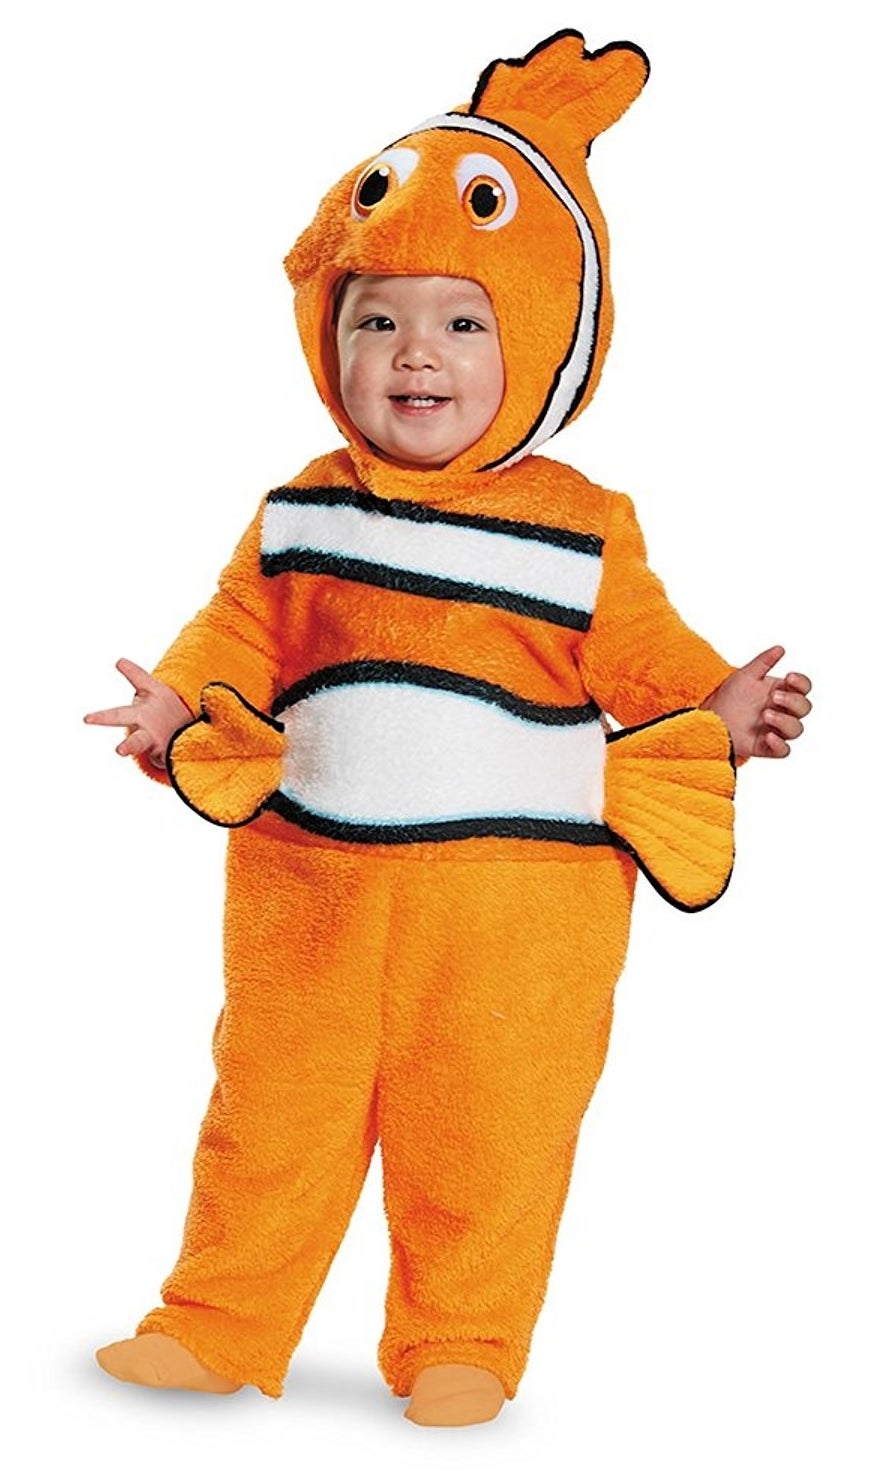 27 Kids Halloween Costumes From Amazon That Are Actually Awesome